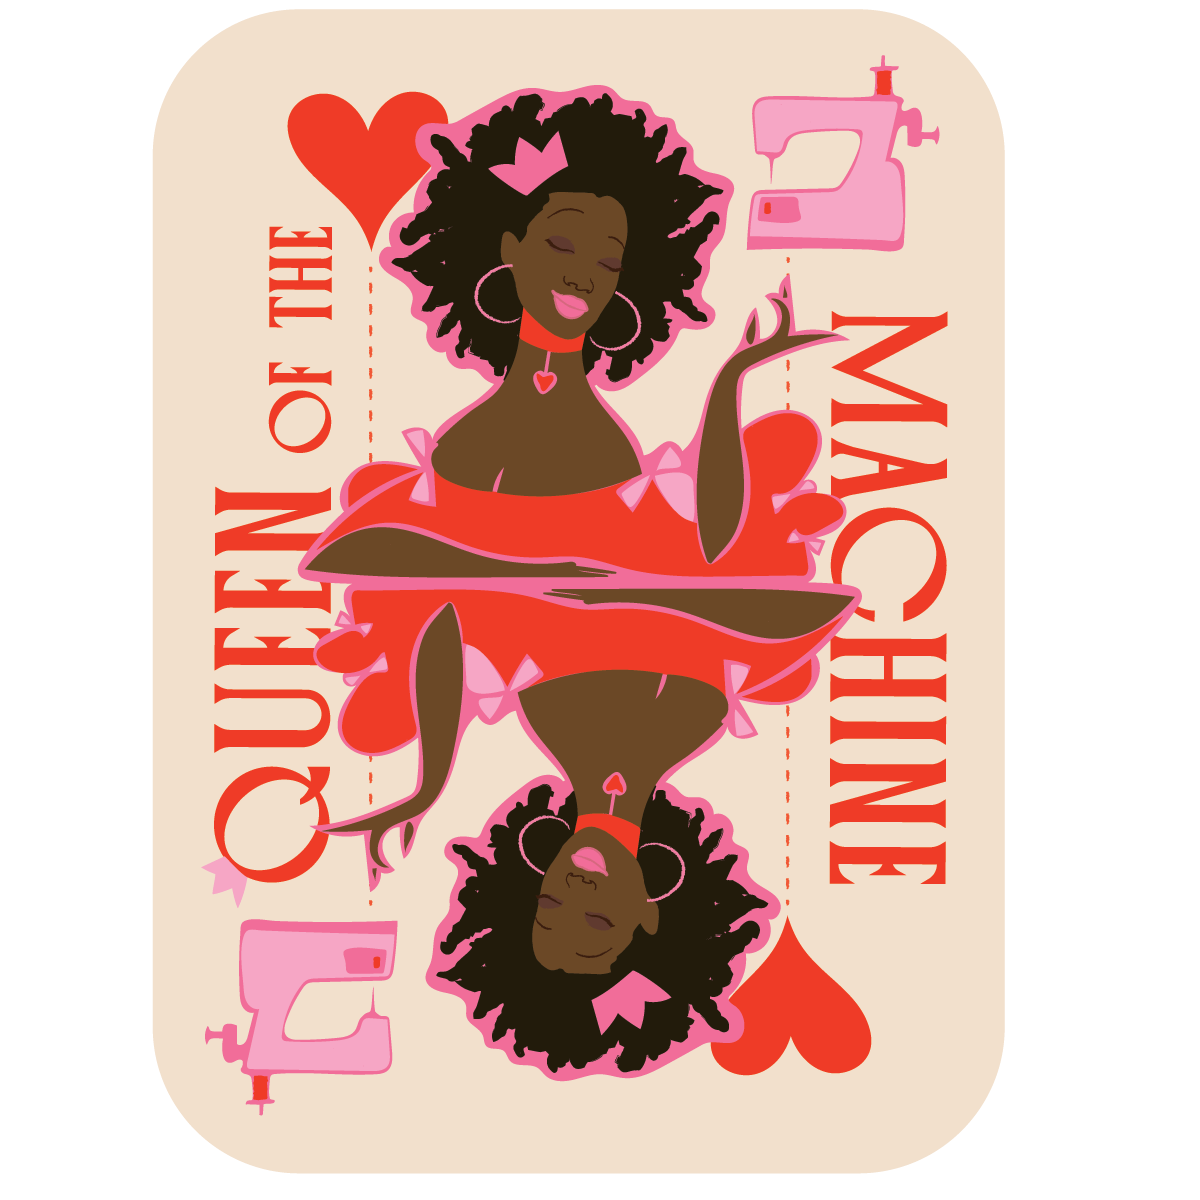 Queen of the Machine ✿ Mary ✿ Sticker ✿ LQC Exclusive